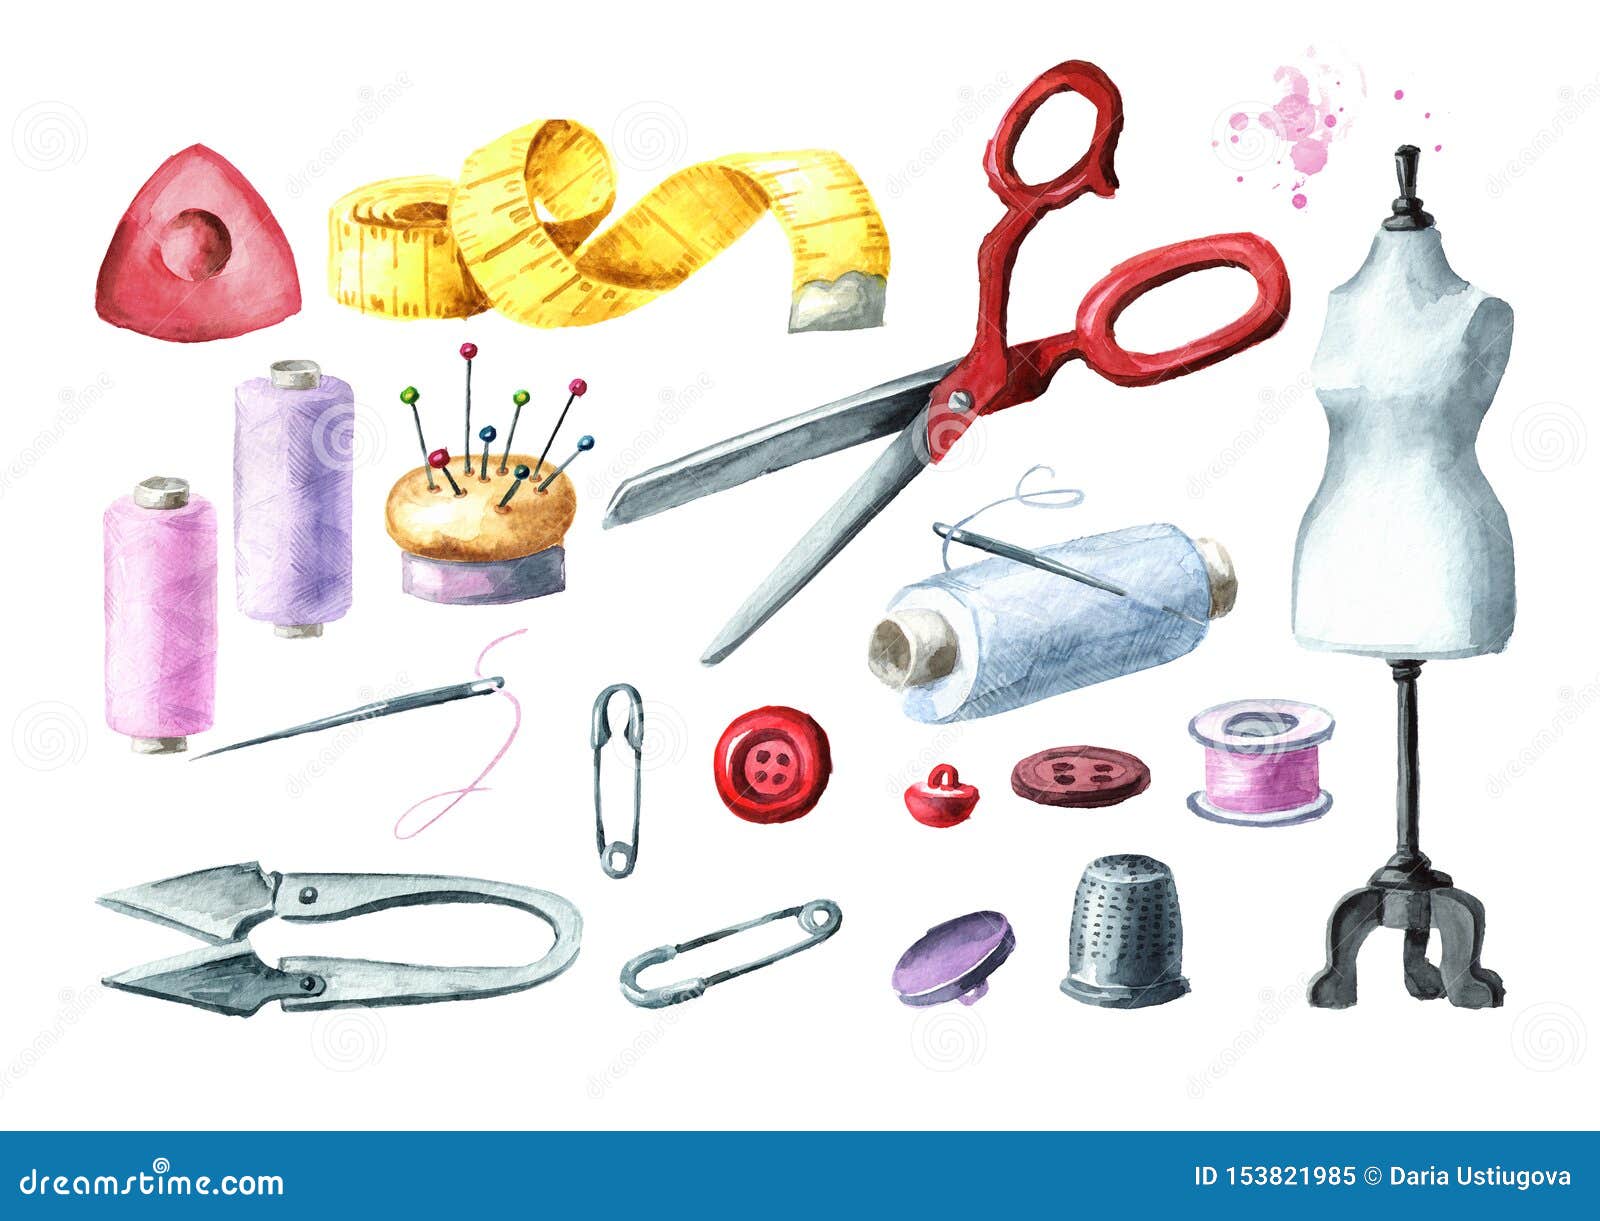 Details about   Playmobil,SEAMSTRESS,WITH SCISSORS,PIN CUSHION,TAPE MEASURER 